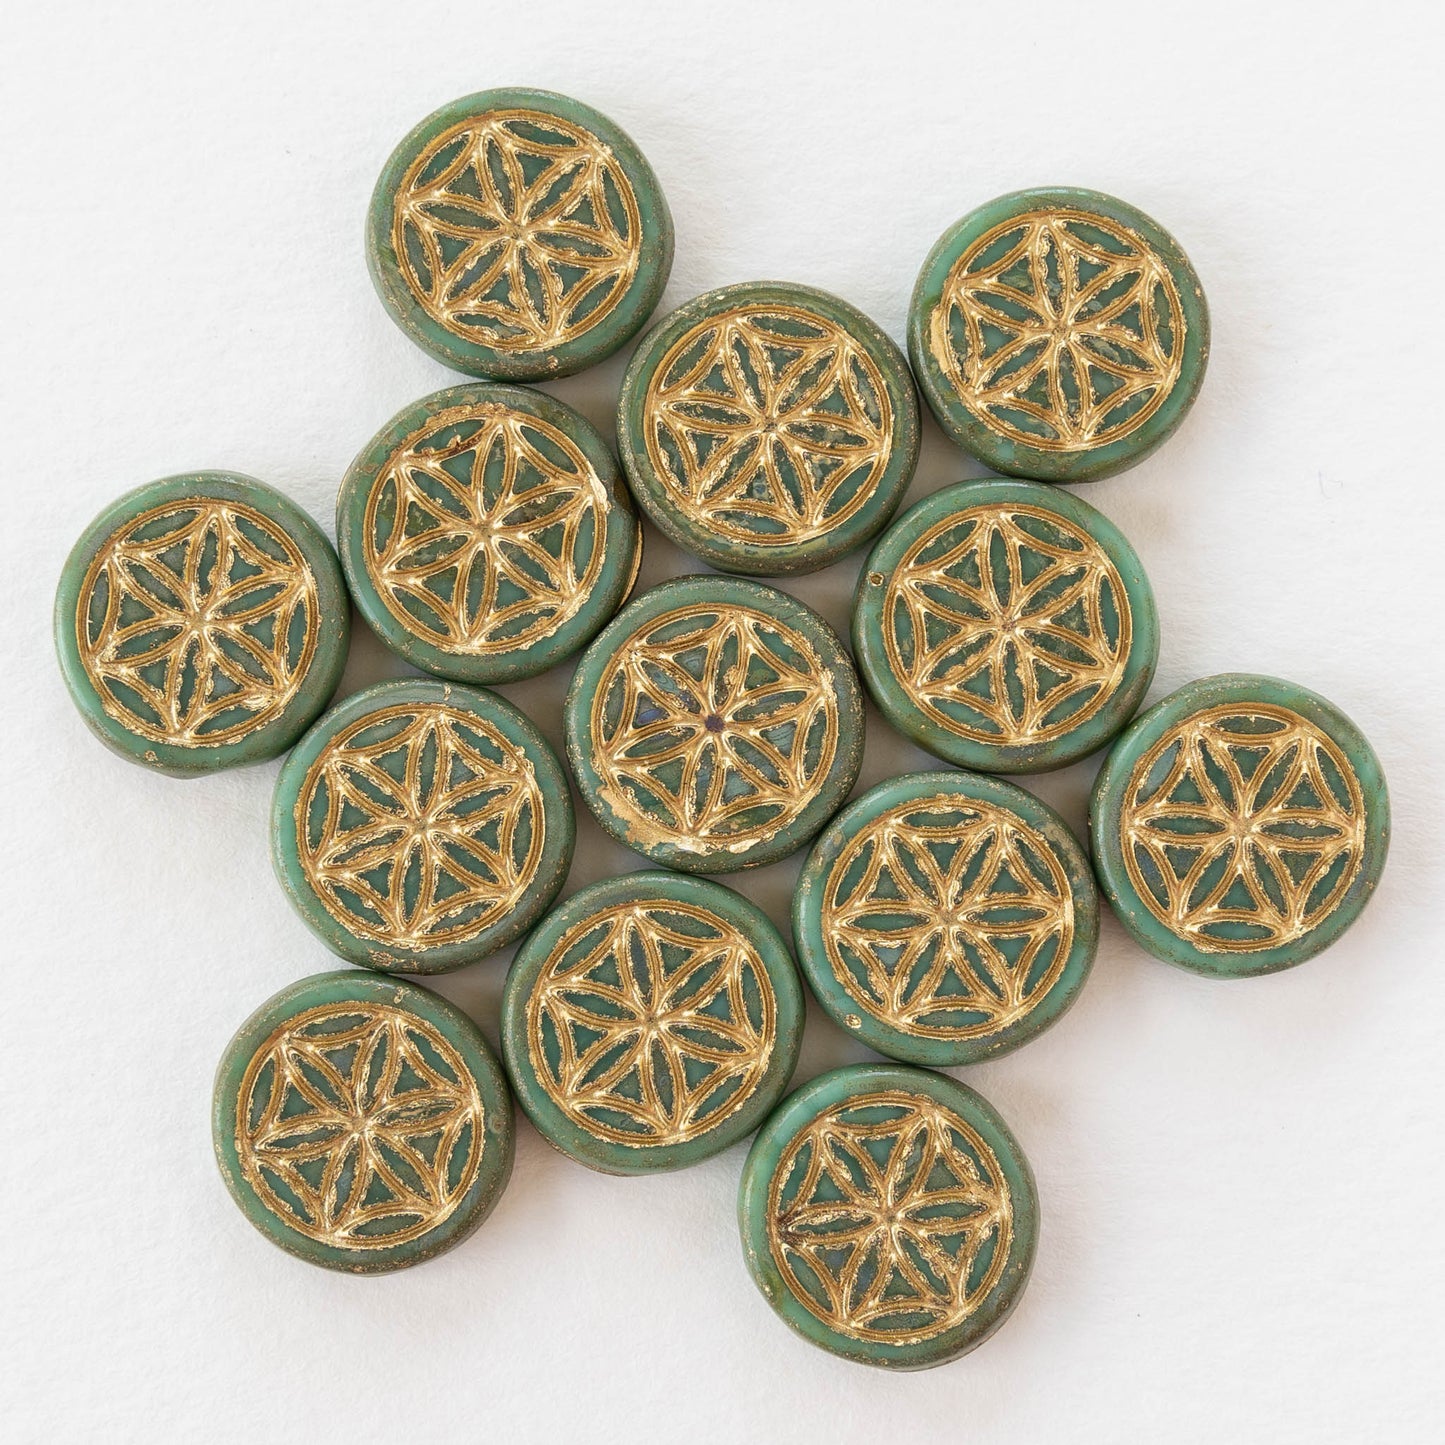 Load image into Gallery viewer, 19mm Flower of Life Coin Bead -  Aged Turquoise with Gold Wash - Choose Amount
